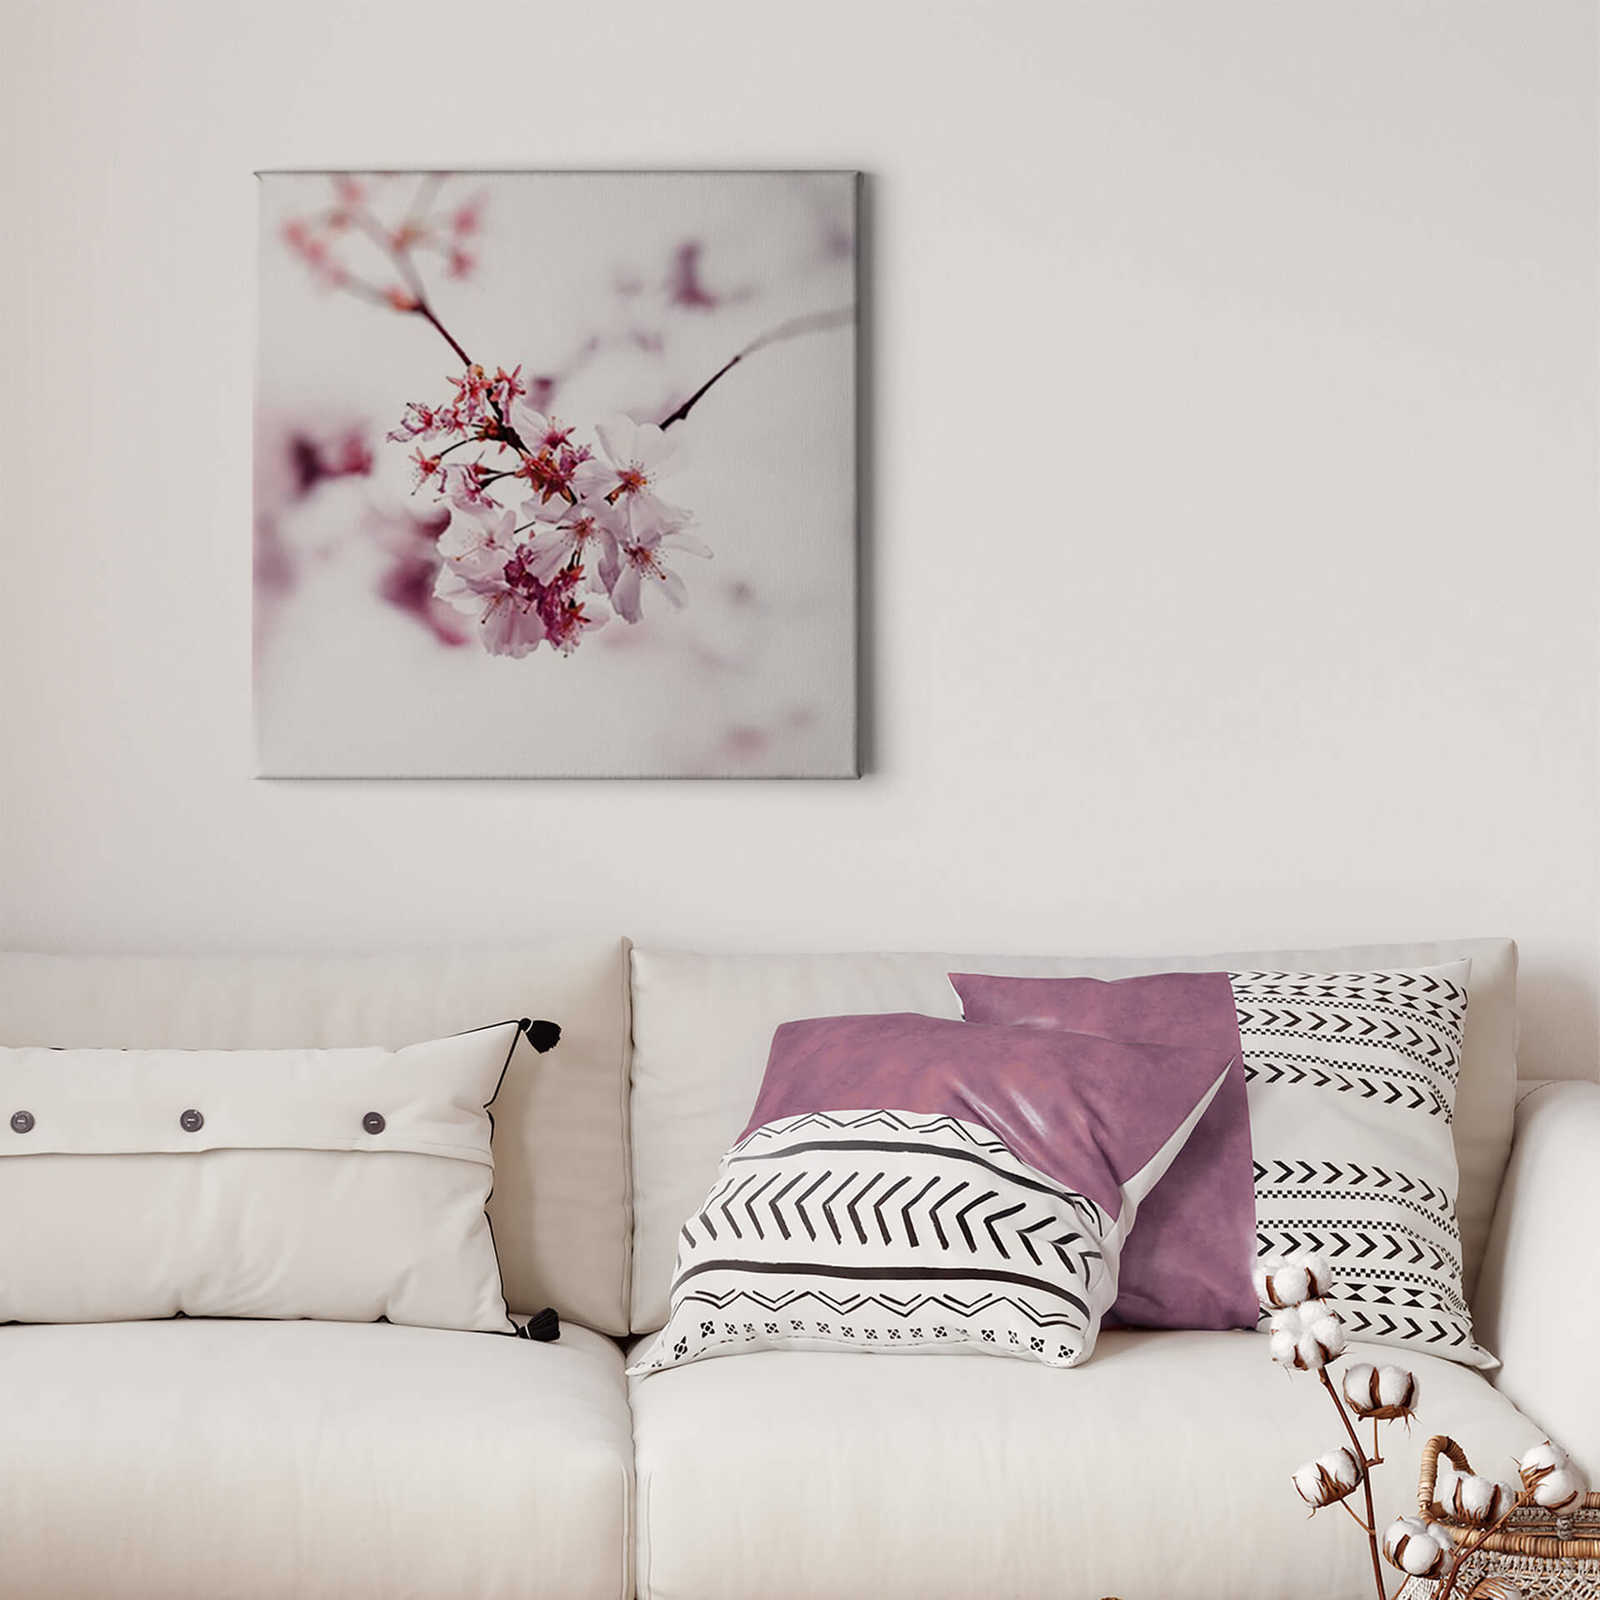             Cherry blossom on square canvas print – pink, white
        